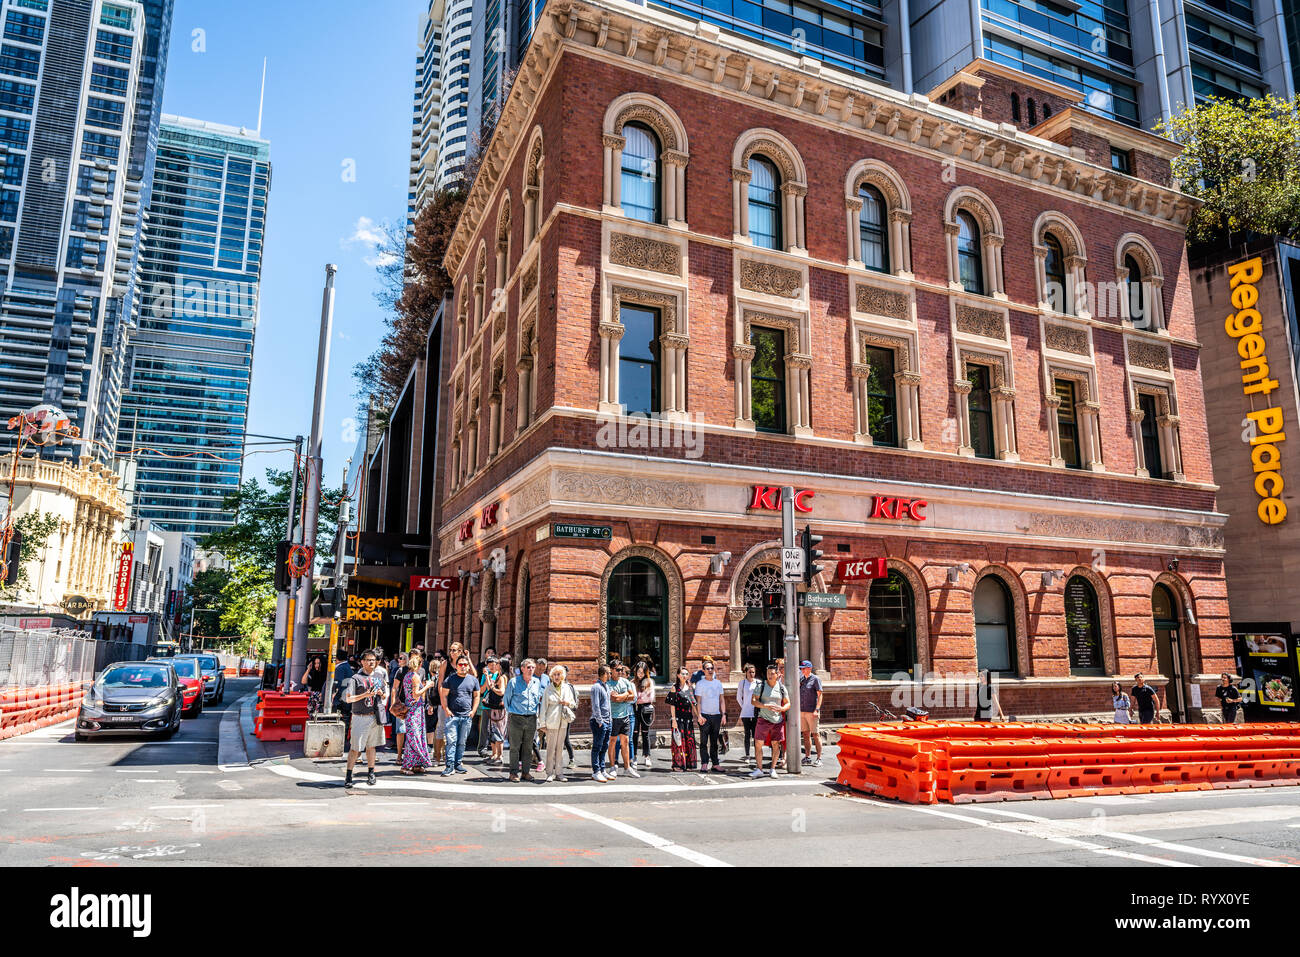 23rd December 2018, Sydney NSW Australia : Street view at the crossing of George and Bathurst street with KFC in old bricks building and people in Syd Stock Photo